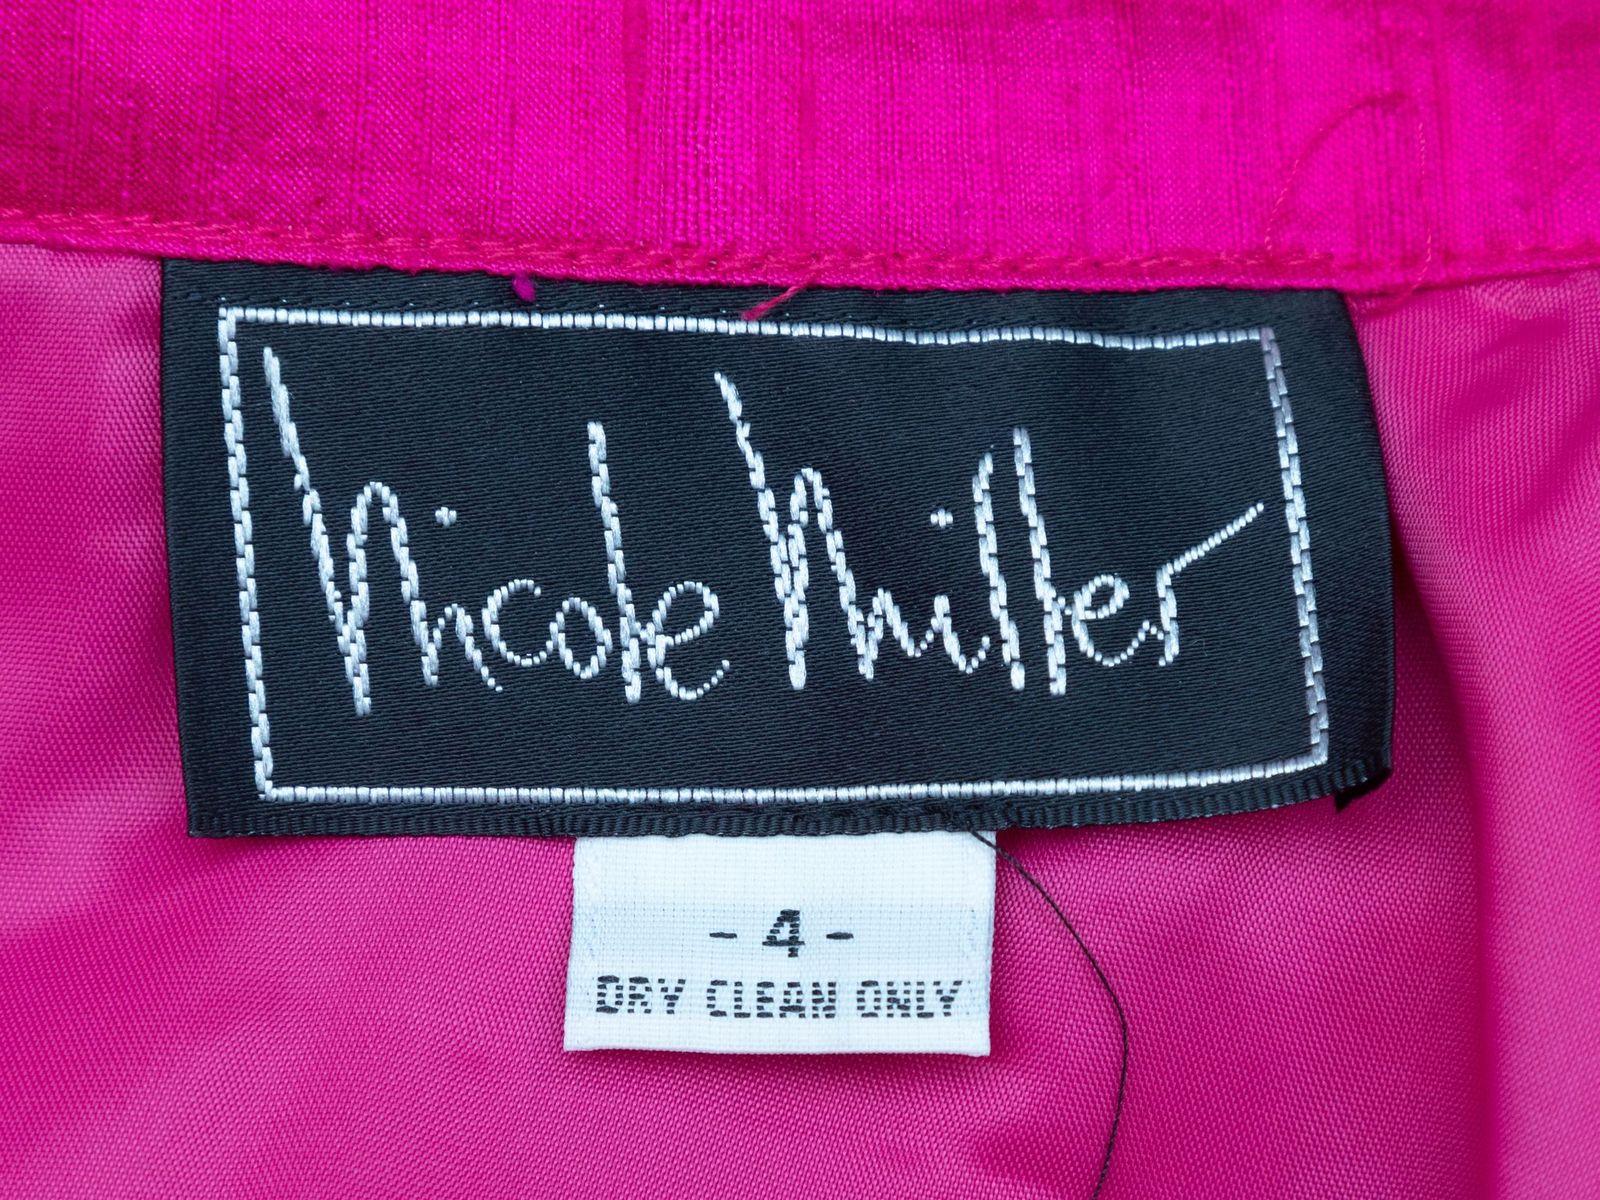 Product Details: Vintage hot pink matching skirt and sleeveless top set by Nicole Miller. Top features notched collar and crystal-embellished front button closures. Skirt features zip closure at side. Top- 32